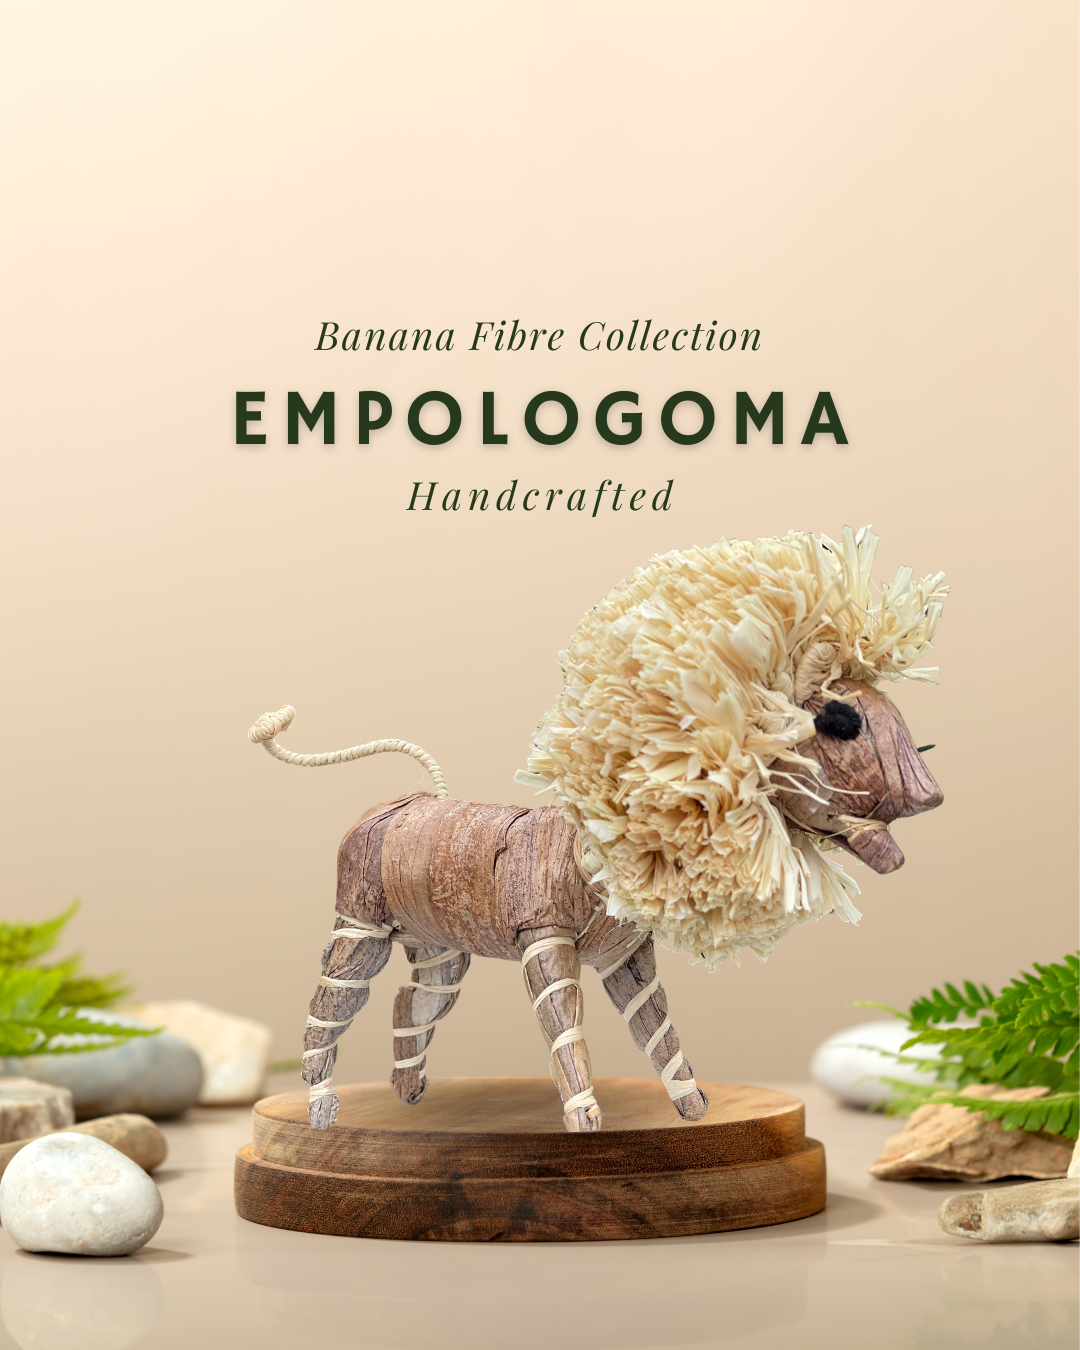 BananArt: Handcrafted Figurines Made from Sustainable Banana Fibre